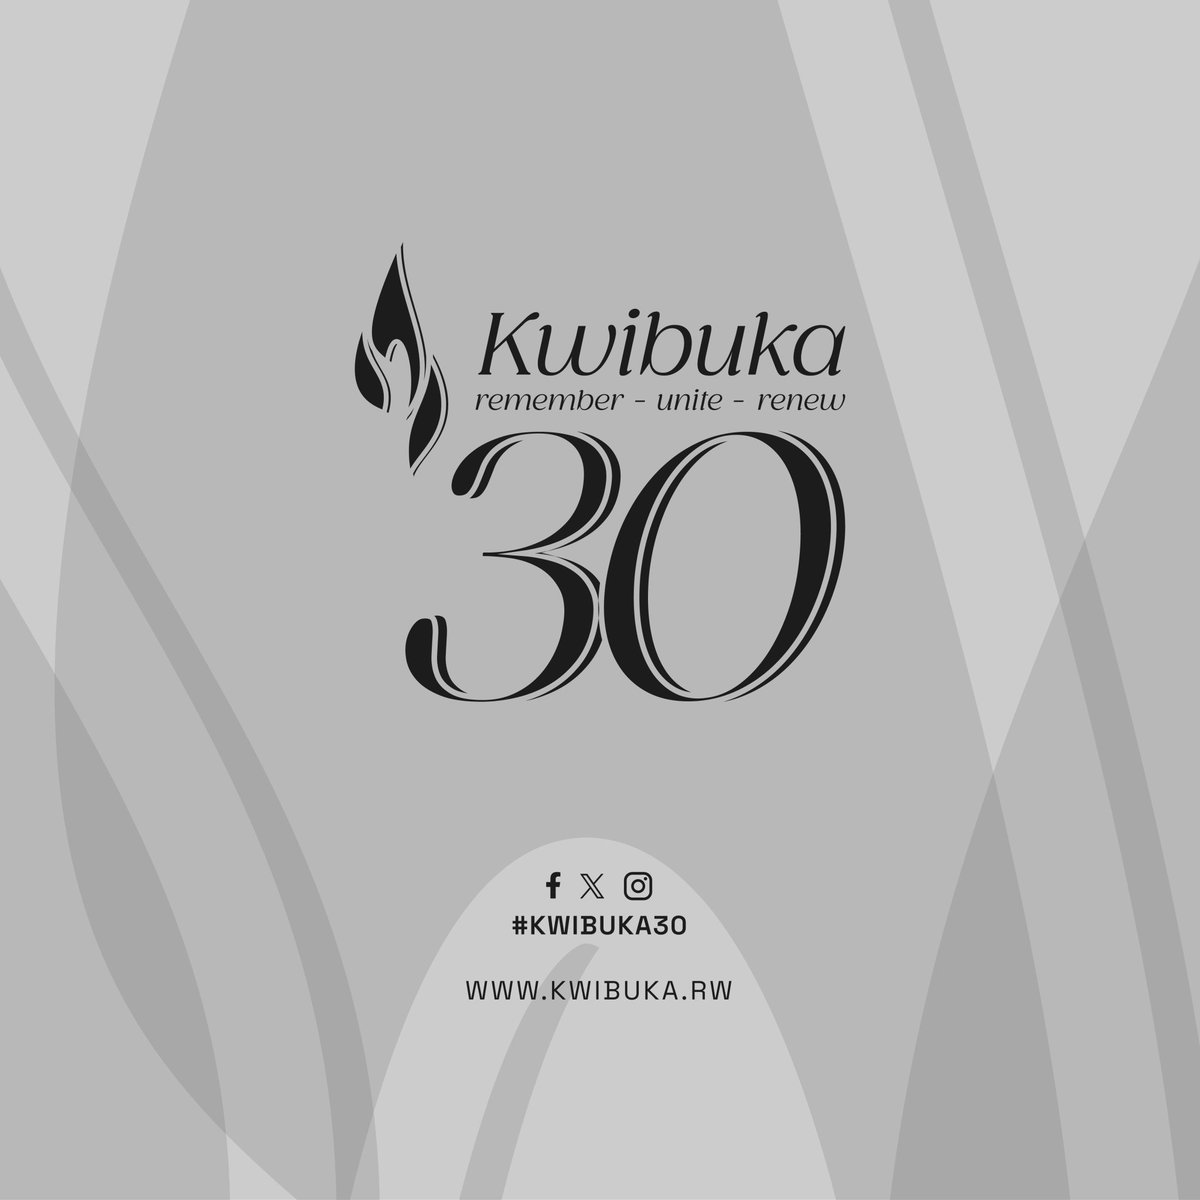 'Rest assured; Rwandans may be grieving, but we will never be too tired to tell the truth, not when we know the deadly cost of lies of the kind that are still spread, across the region, today.' - First Lady Jeannette Kagame #Kwibuka30